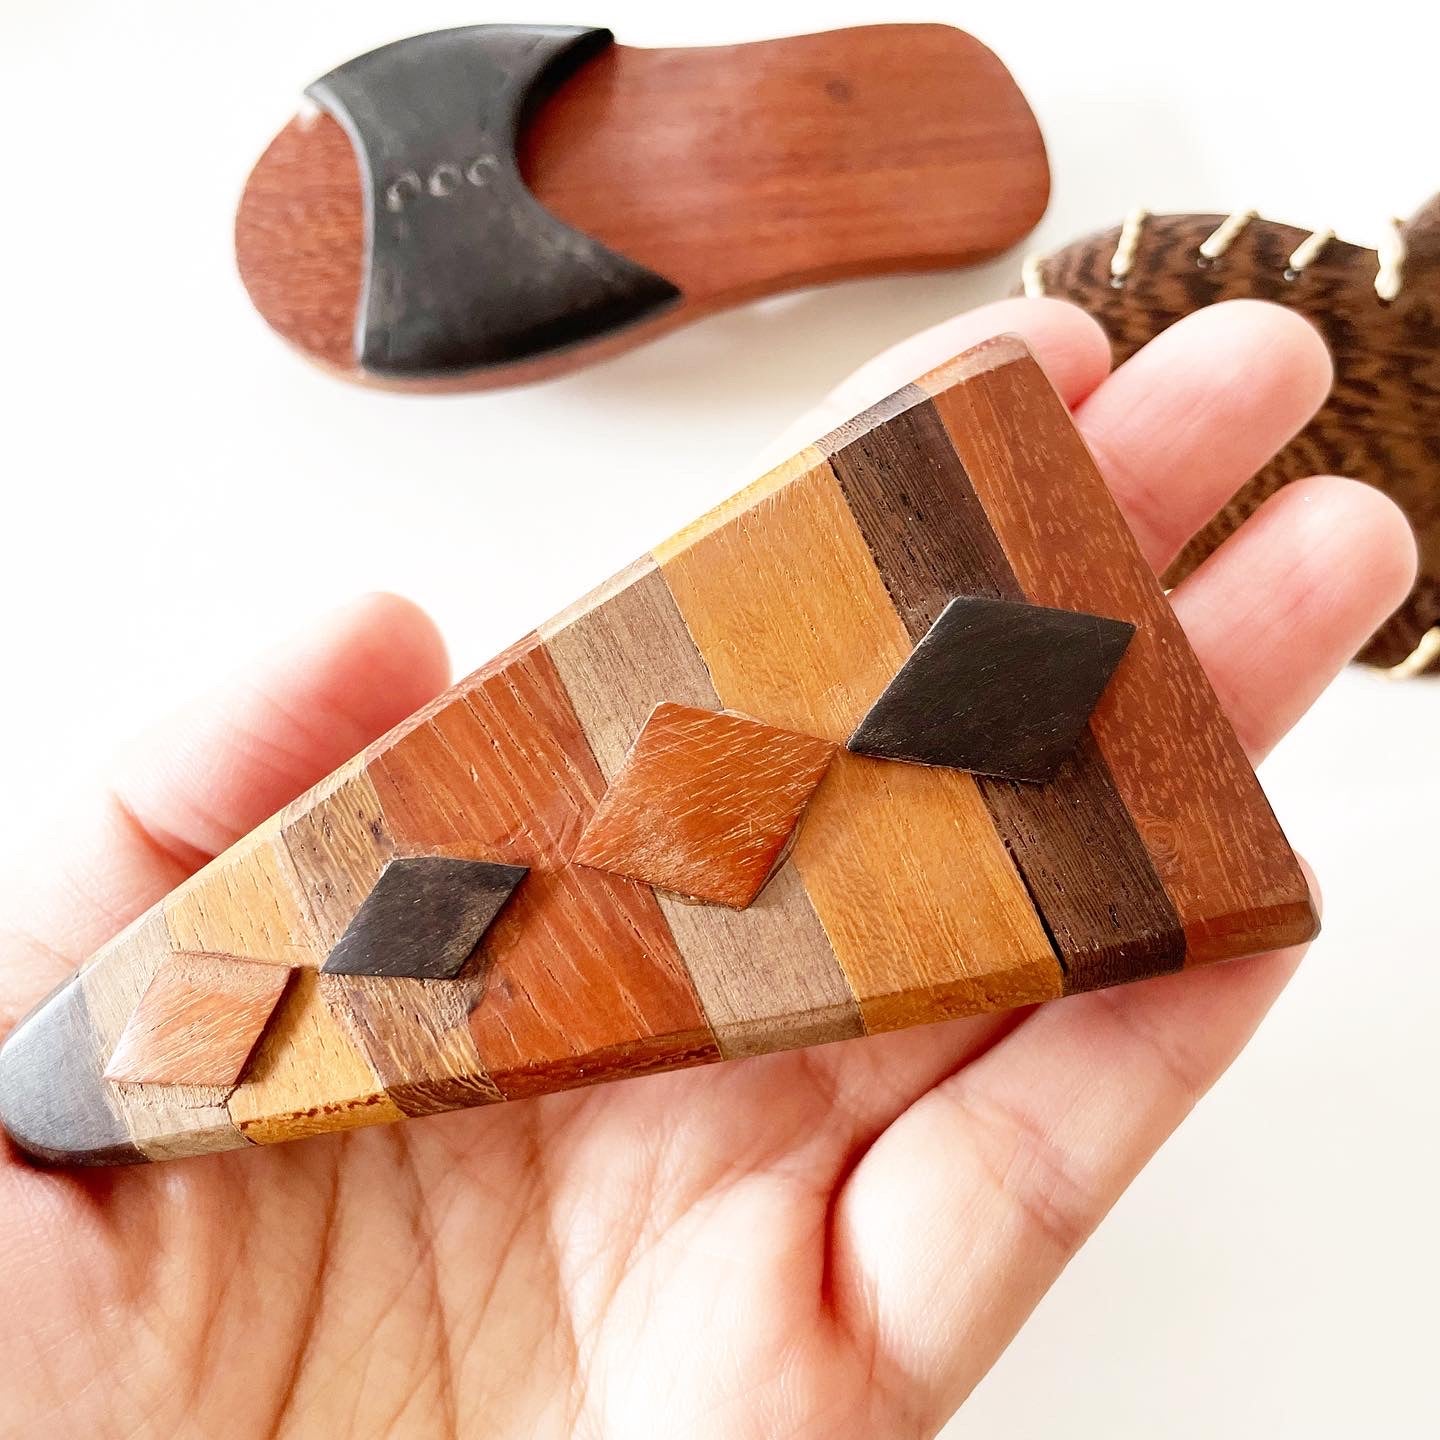 Wooden Hair Barrette (Patched Triangle) 木製髮夾(拼貼三角)